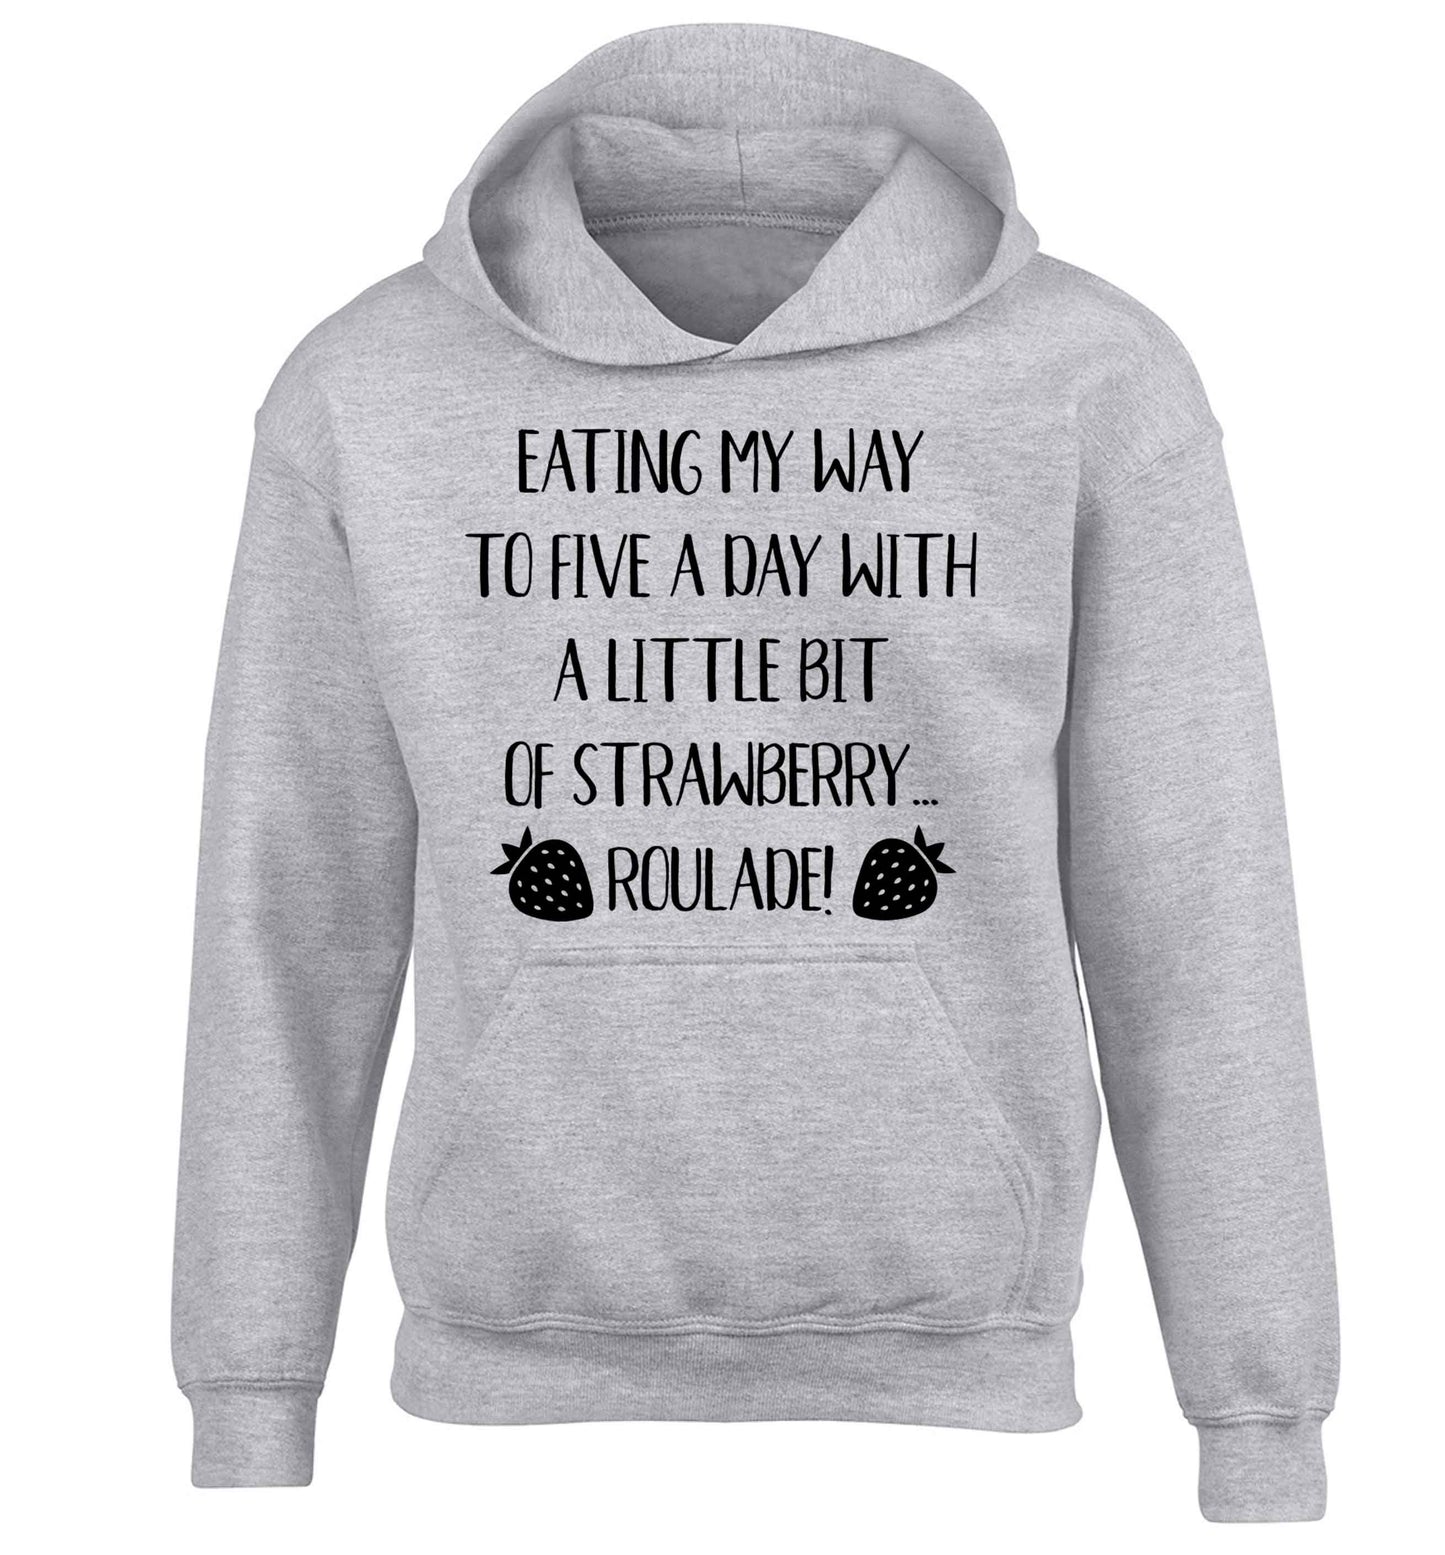 Eating my way to five a day with a little bit of strawberry roulade children's grey hoodie 12-13 Years